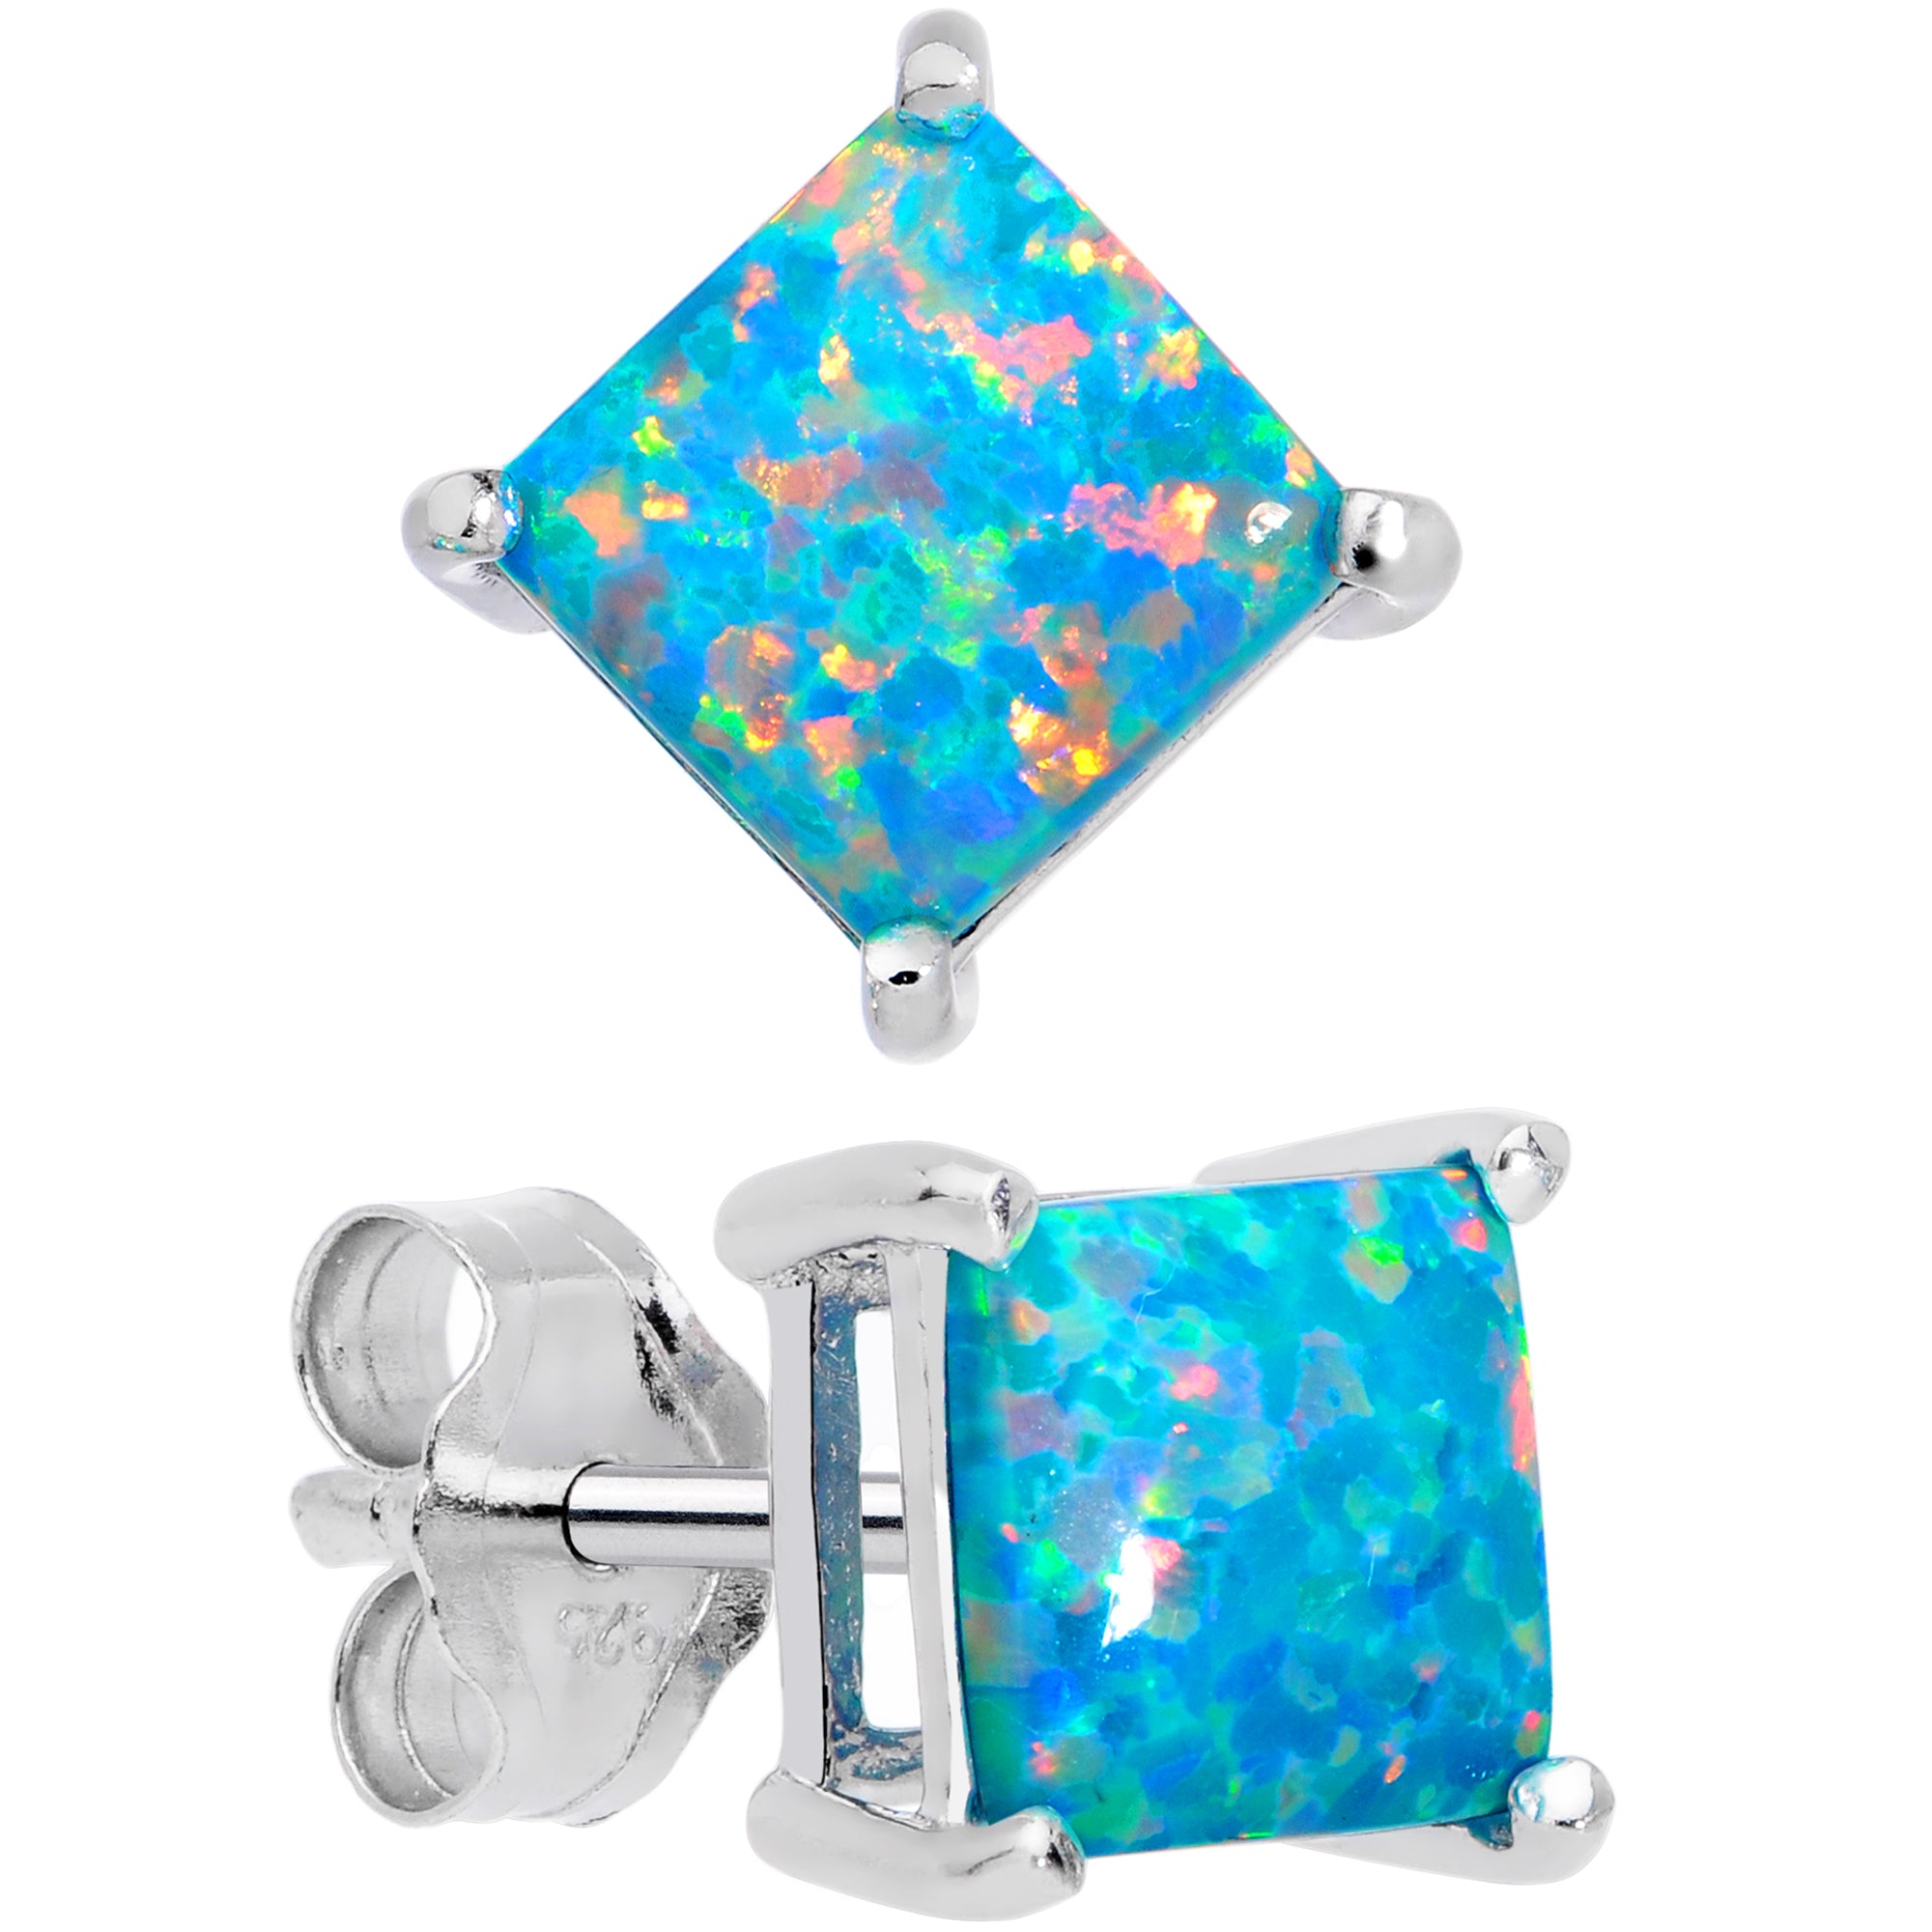 6mm Teal Square Sterling Silver Synthetic Opal Stud Earrings